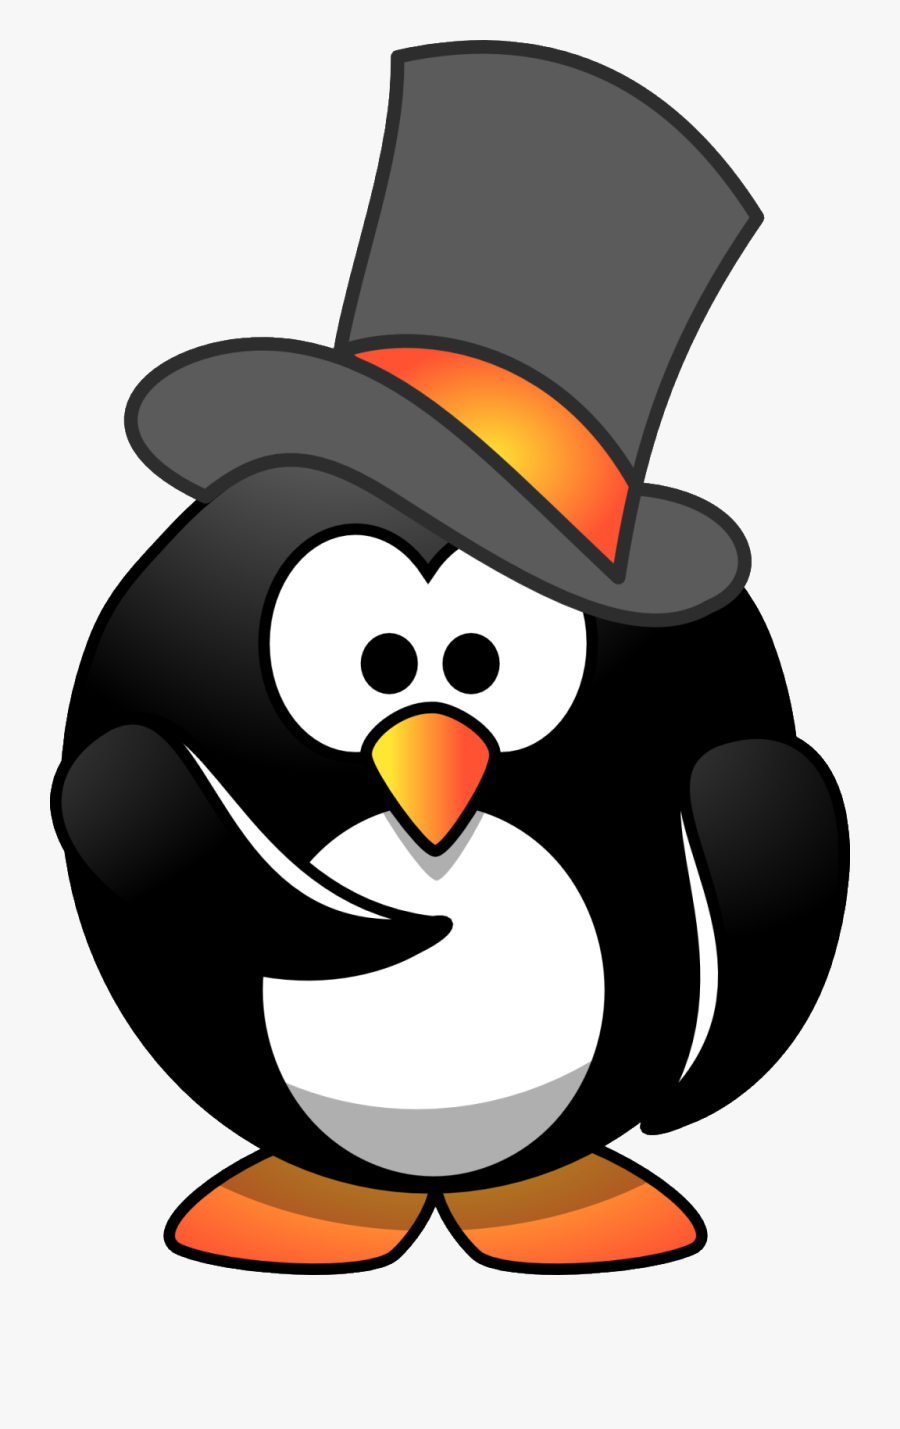 Top Hat Clipart Small - Cartoon Penguin With A Top Hat, Transparent Clipart